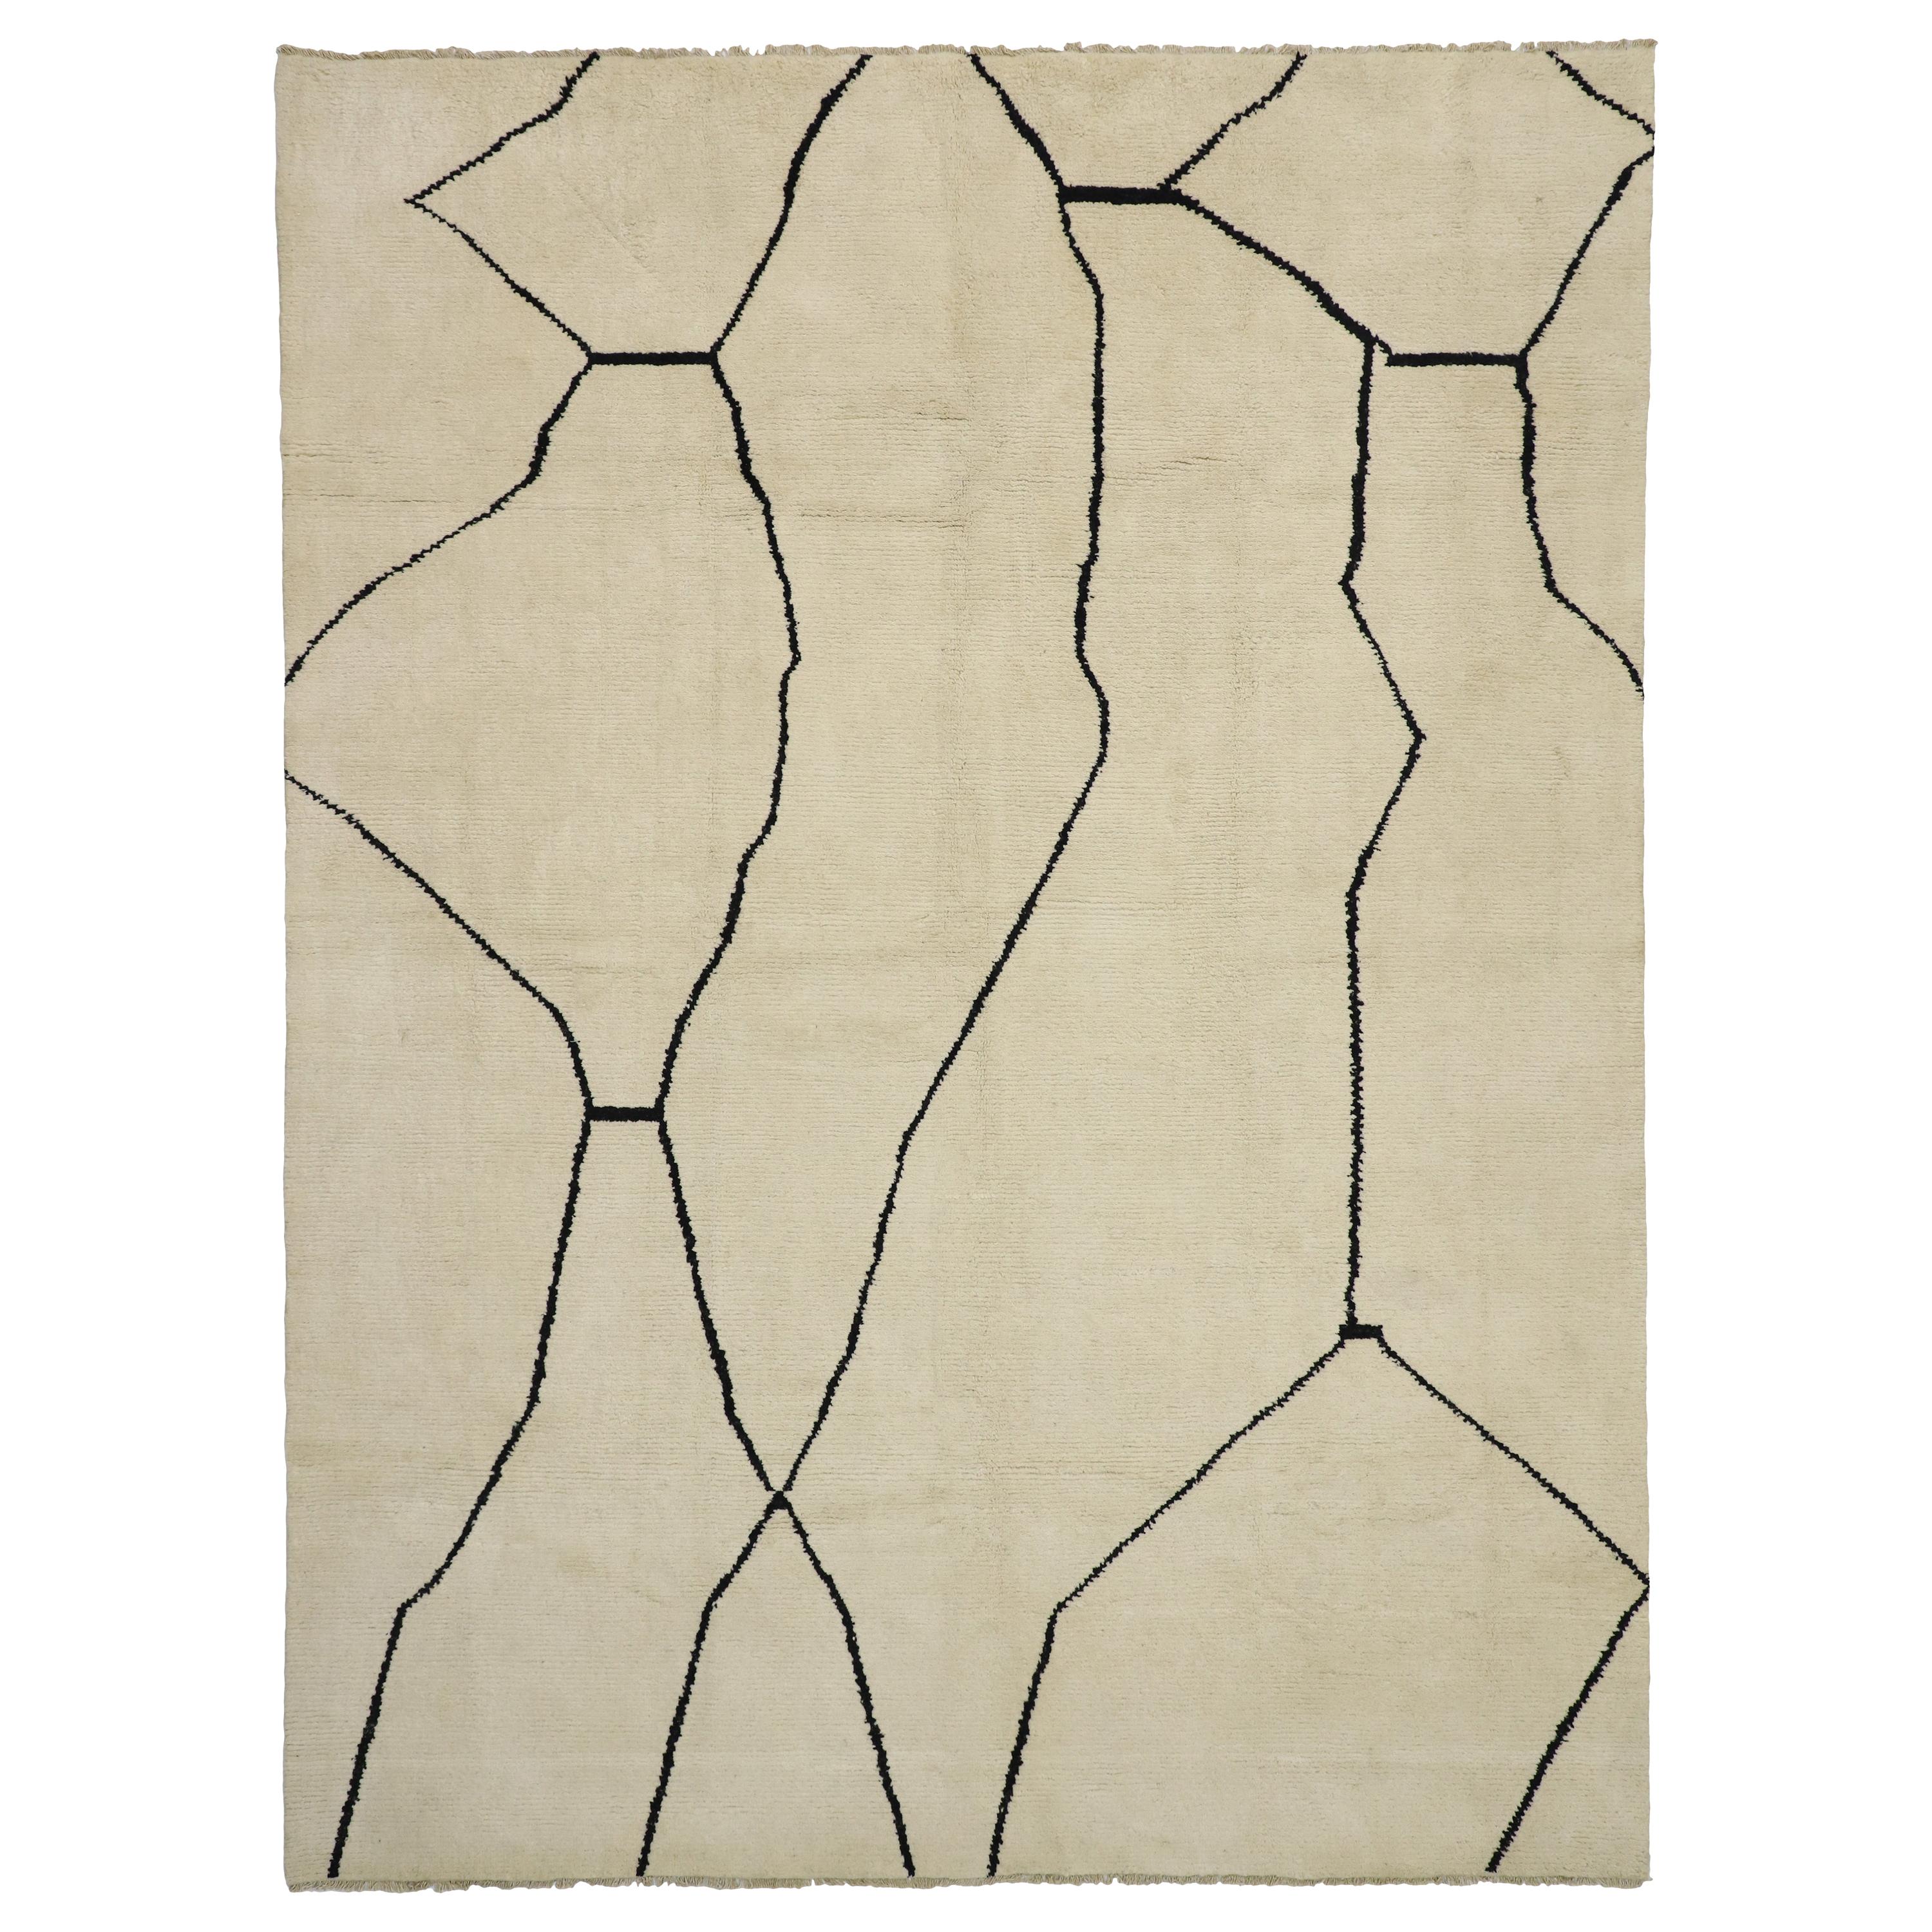 New Contemporary Moroccan Area Rug with Metamorphic Design and Modern Style